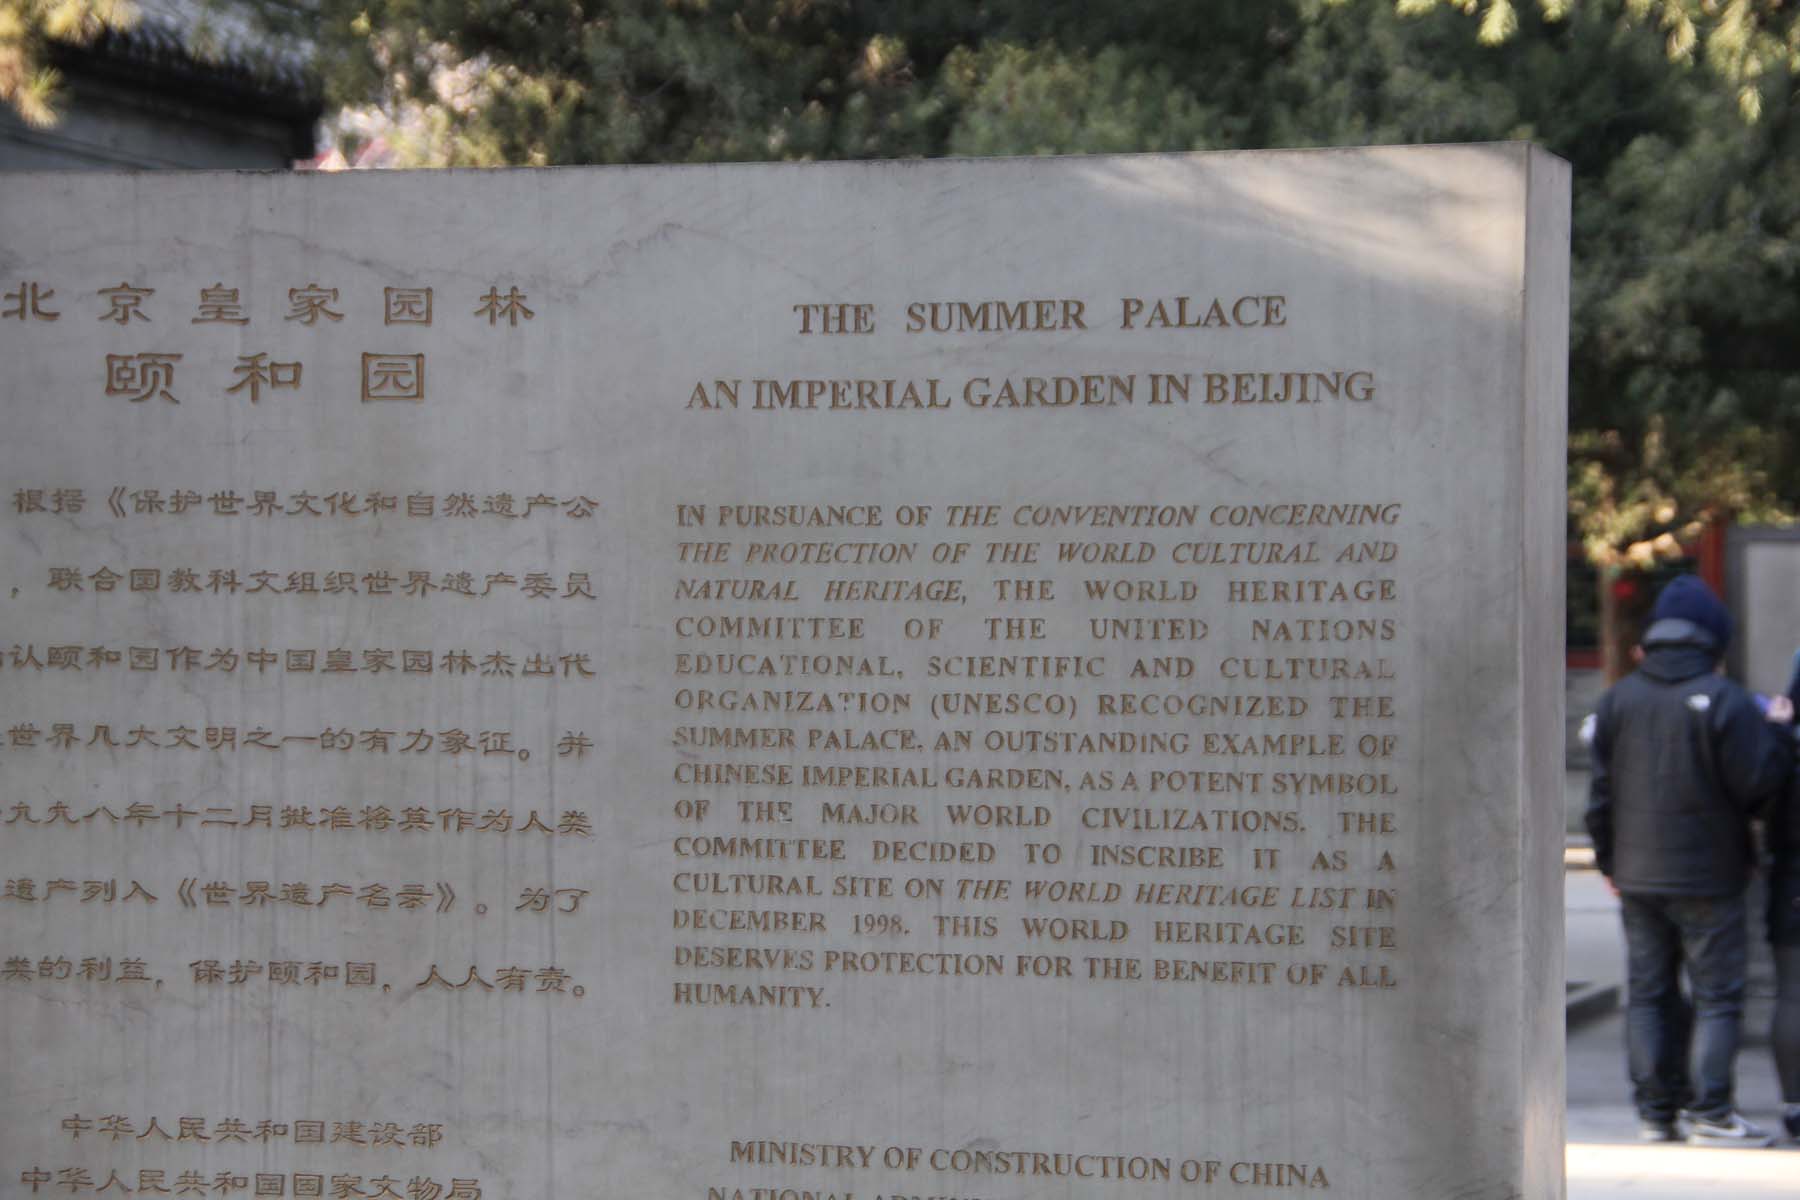 Sign that I saw when I exited the Summer Palace saying it was recognized as an UNESCO World Heritage site in December 1998.